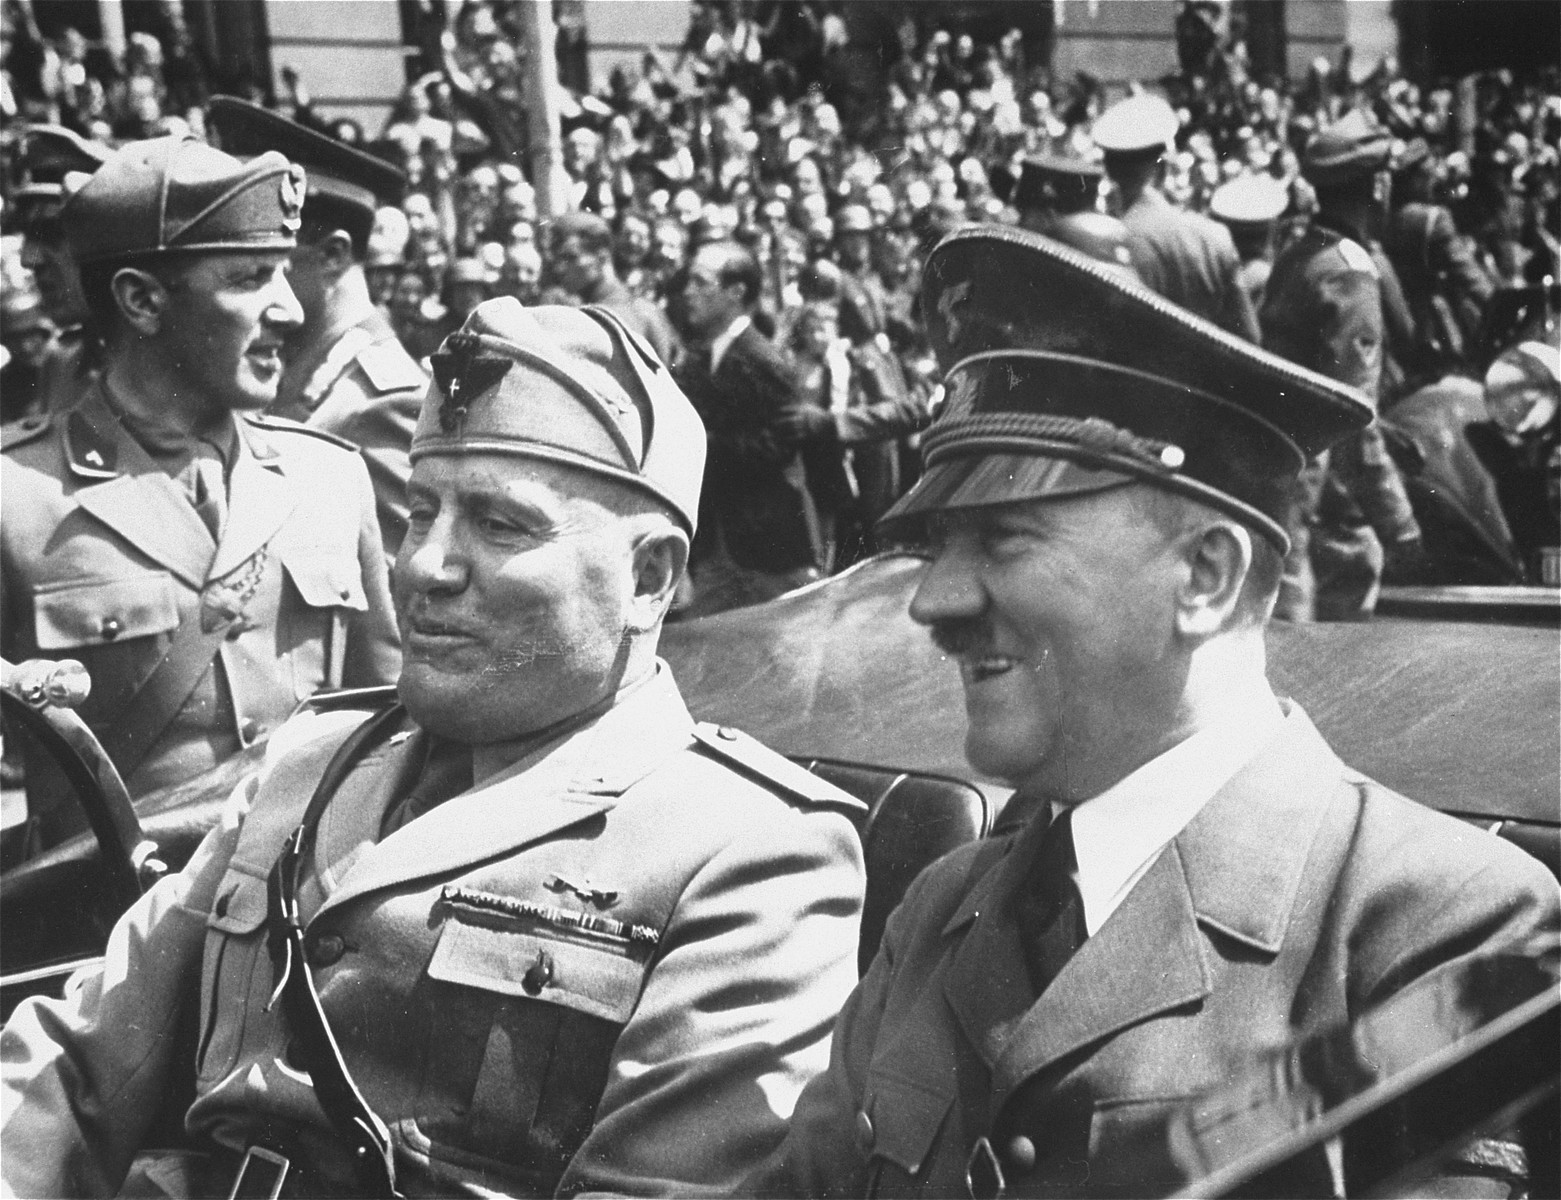 Adolf Hitler and Benito Mussolini ride a car in Munich, where they met the day after France's surrender to discuss immediate plans